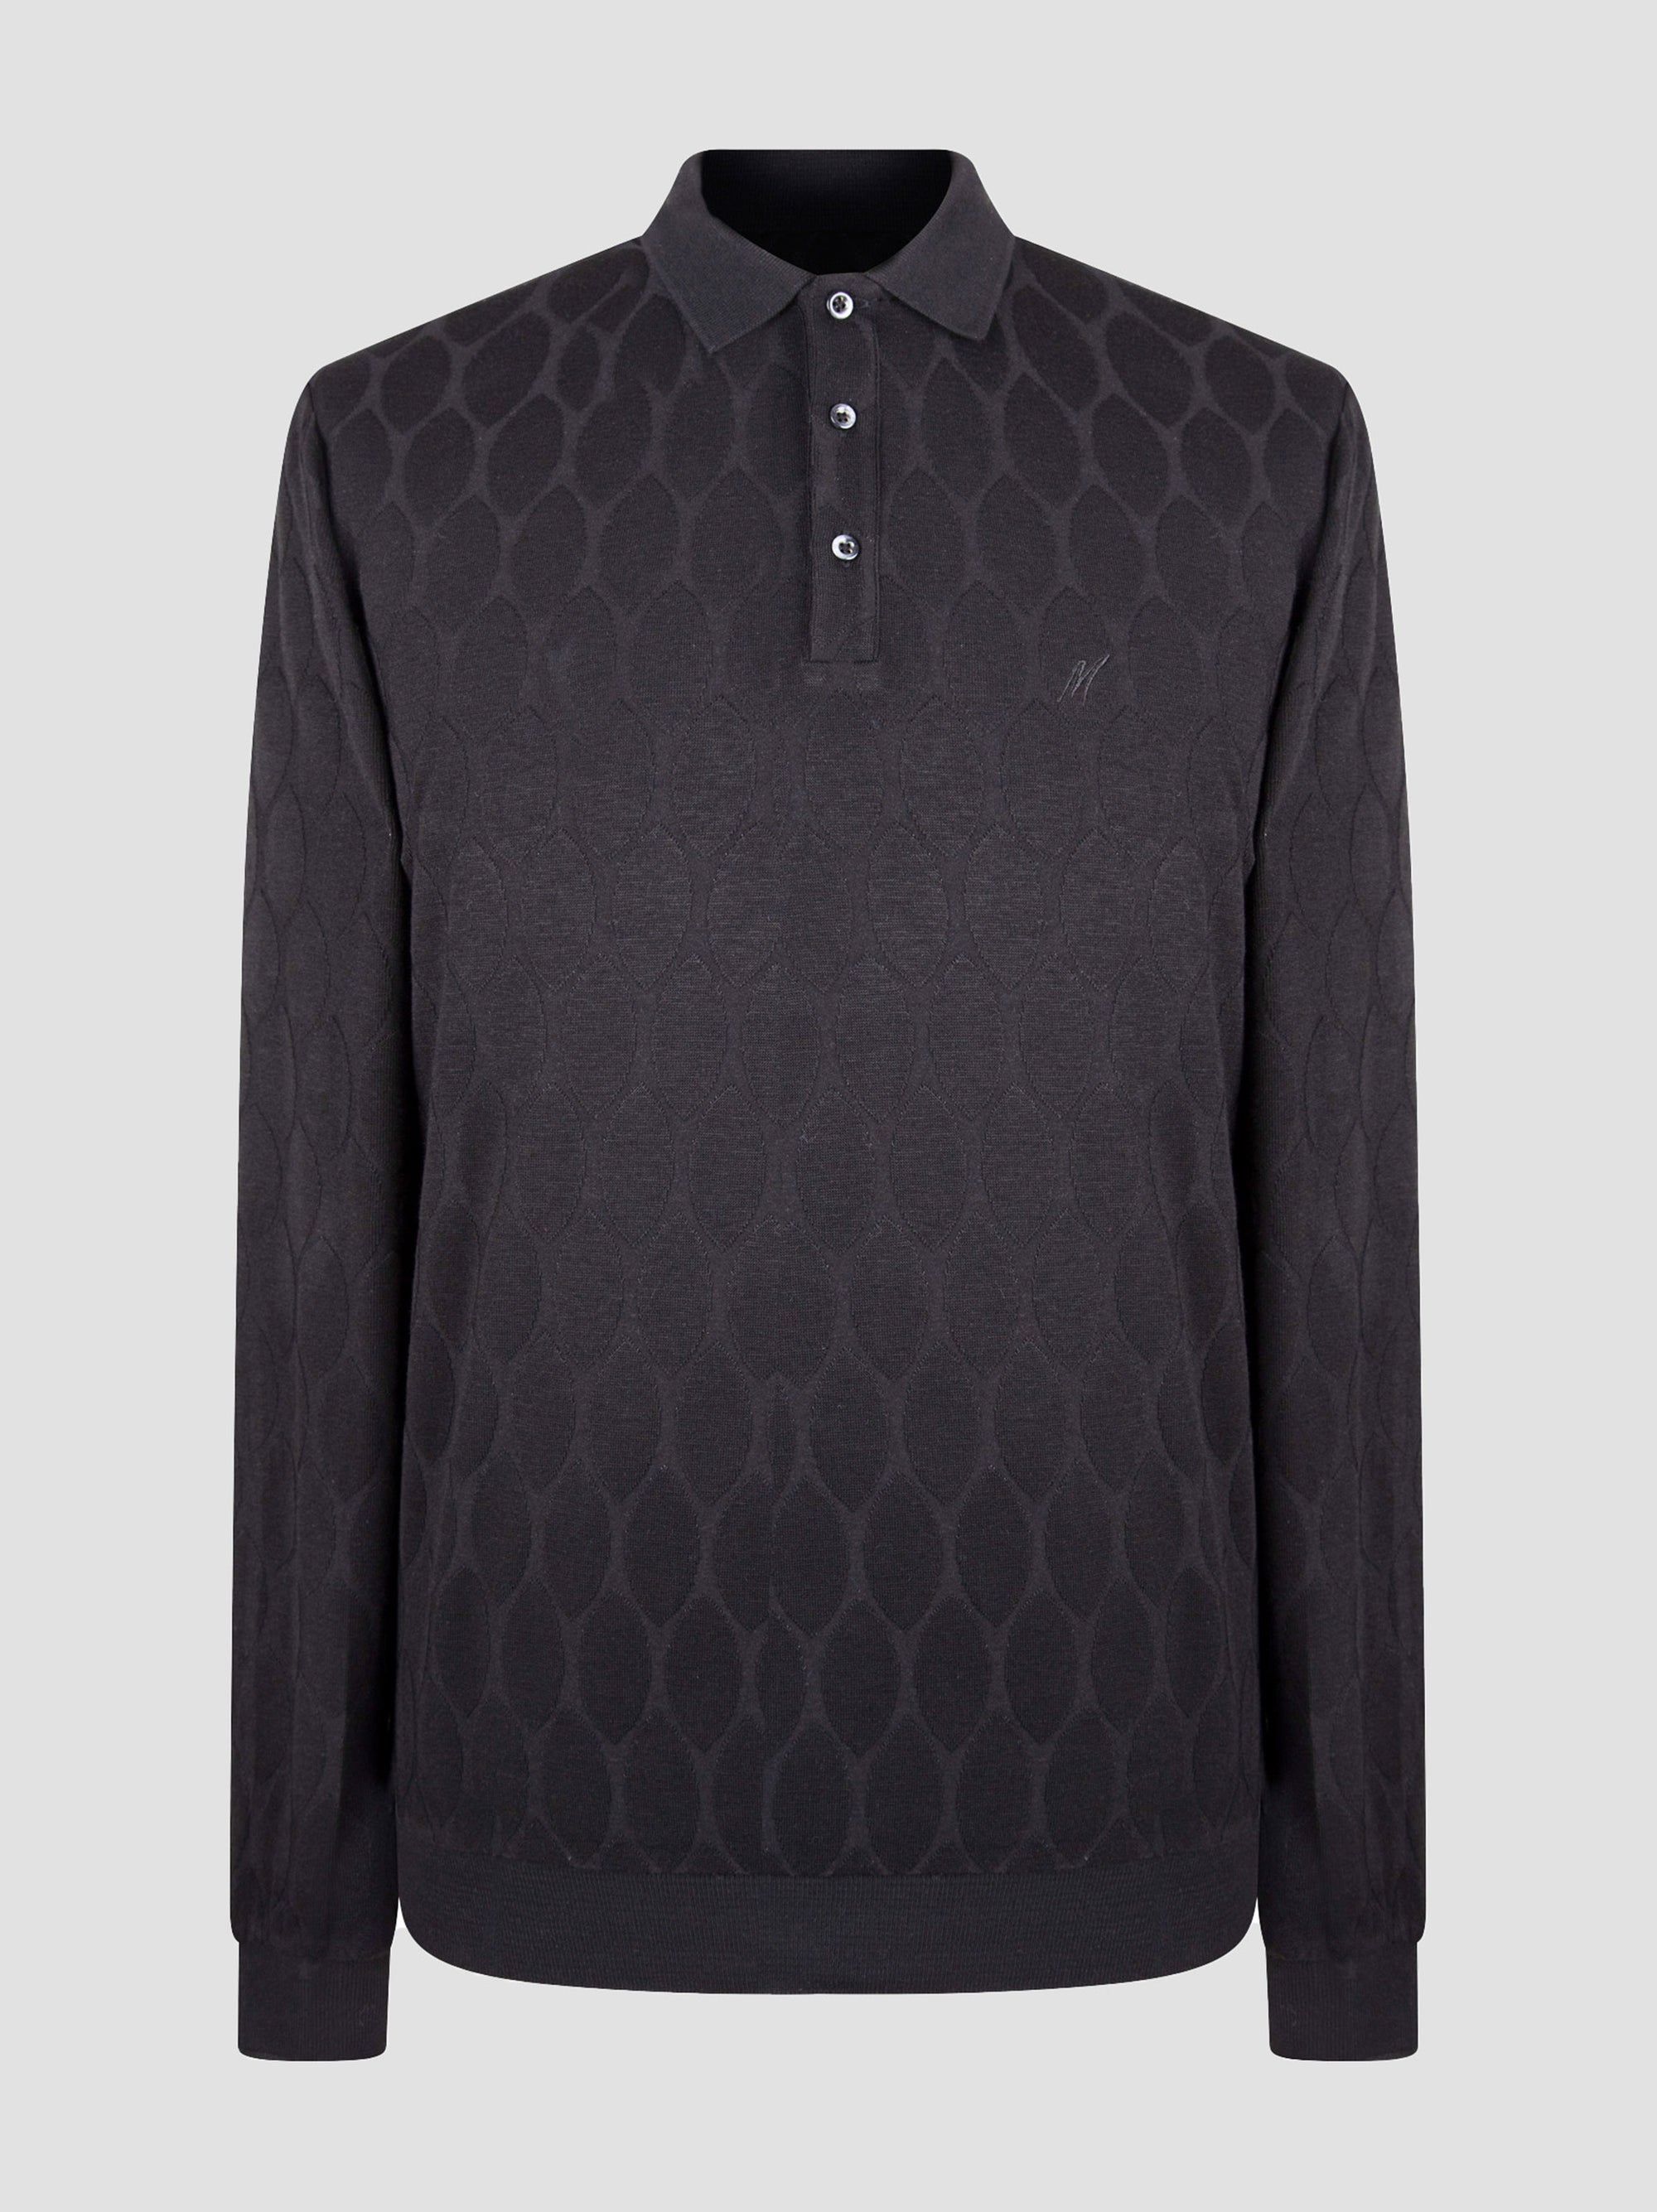 black_knitted_long sleeve_polo